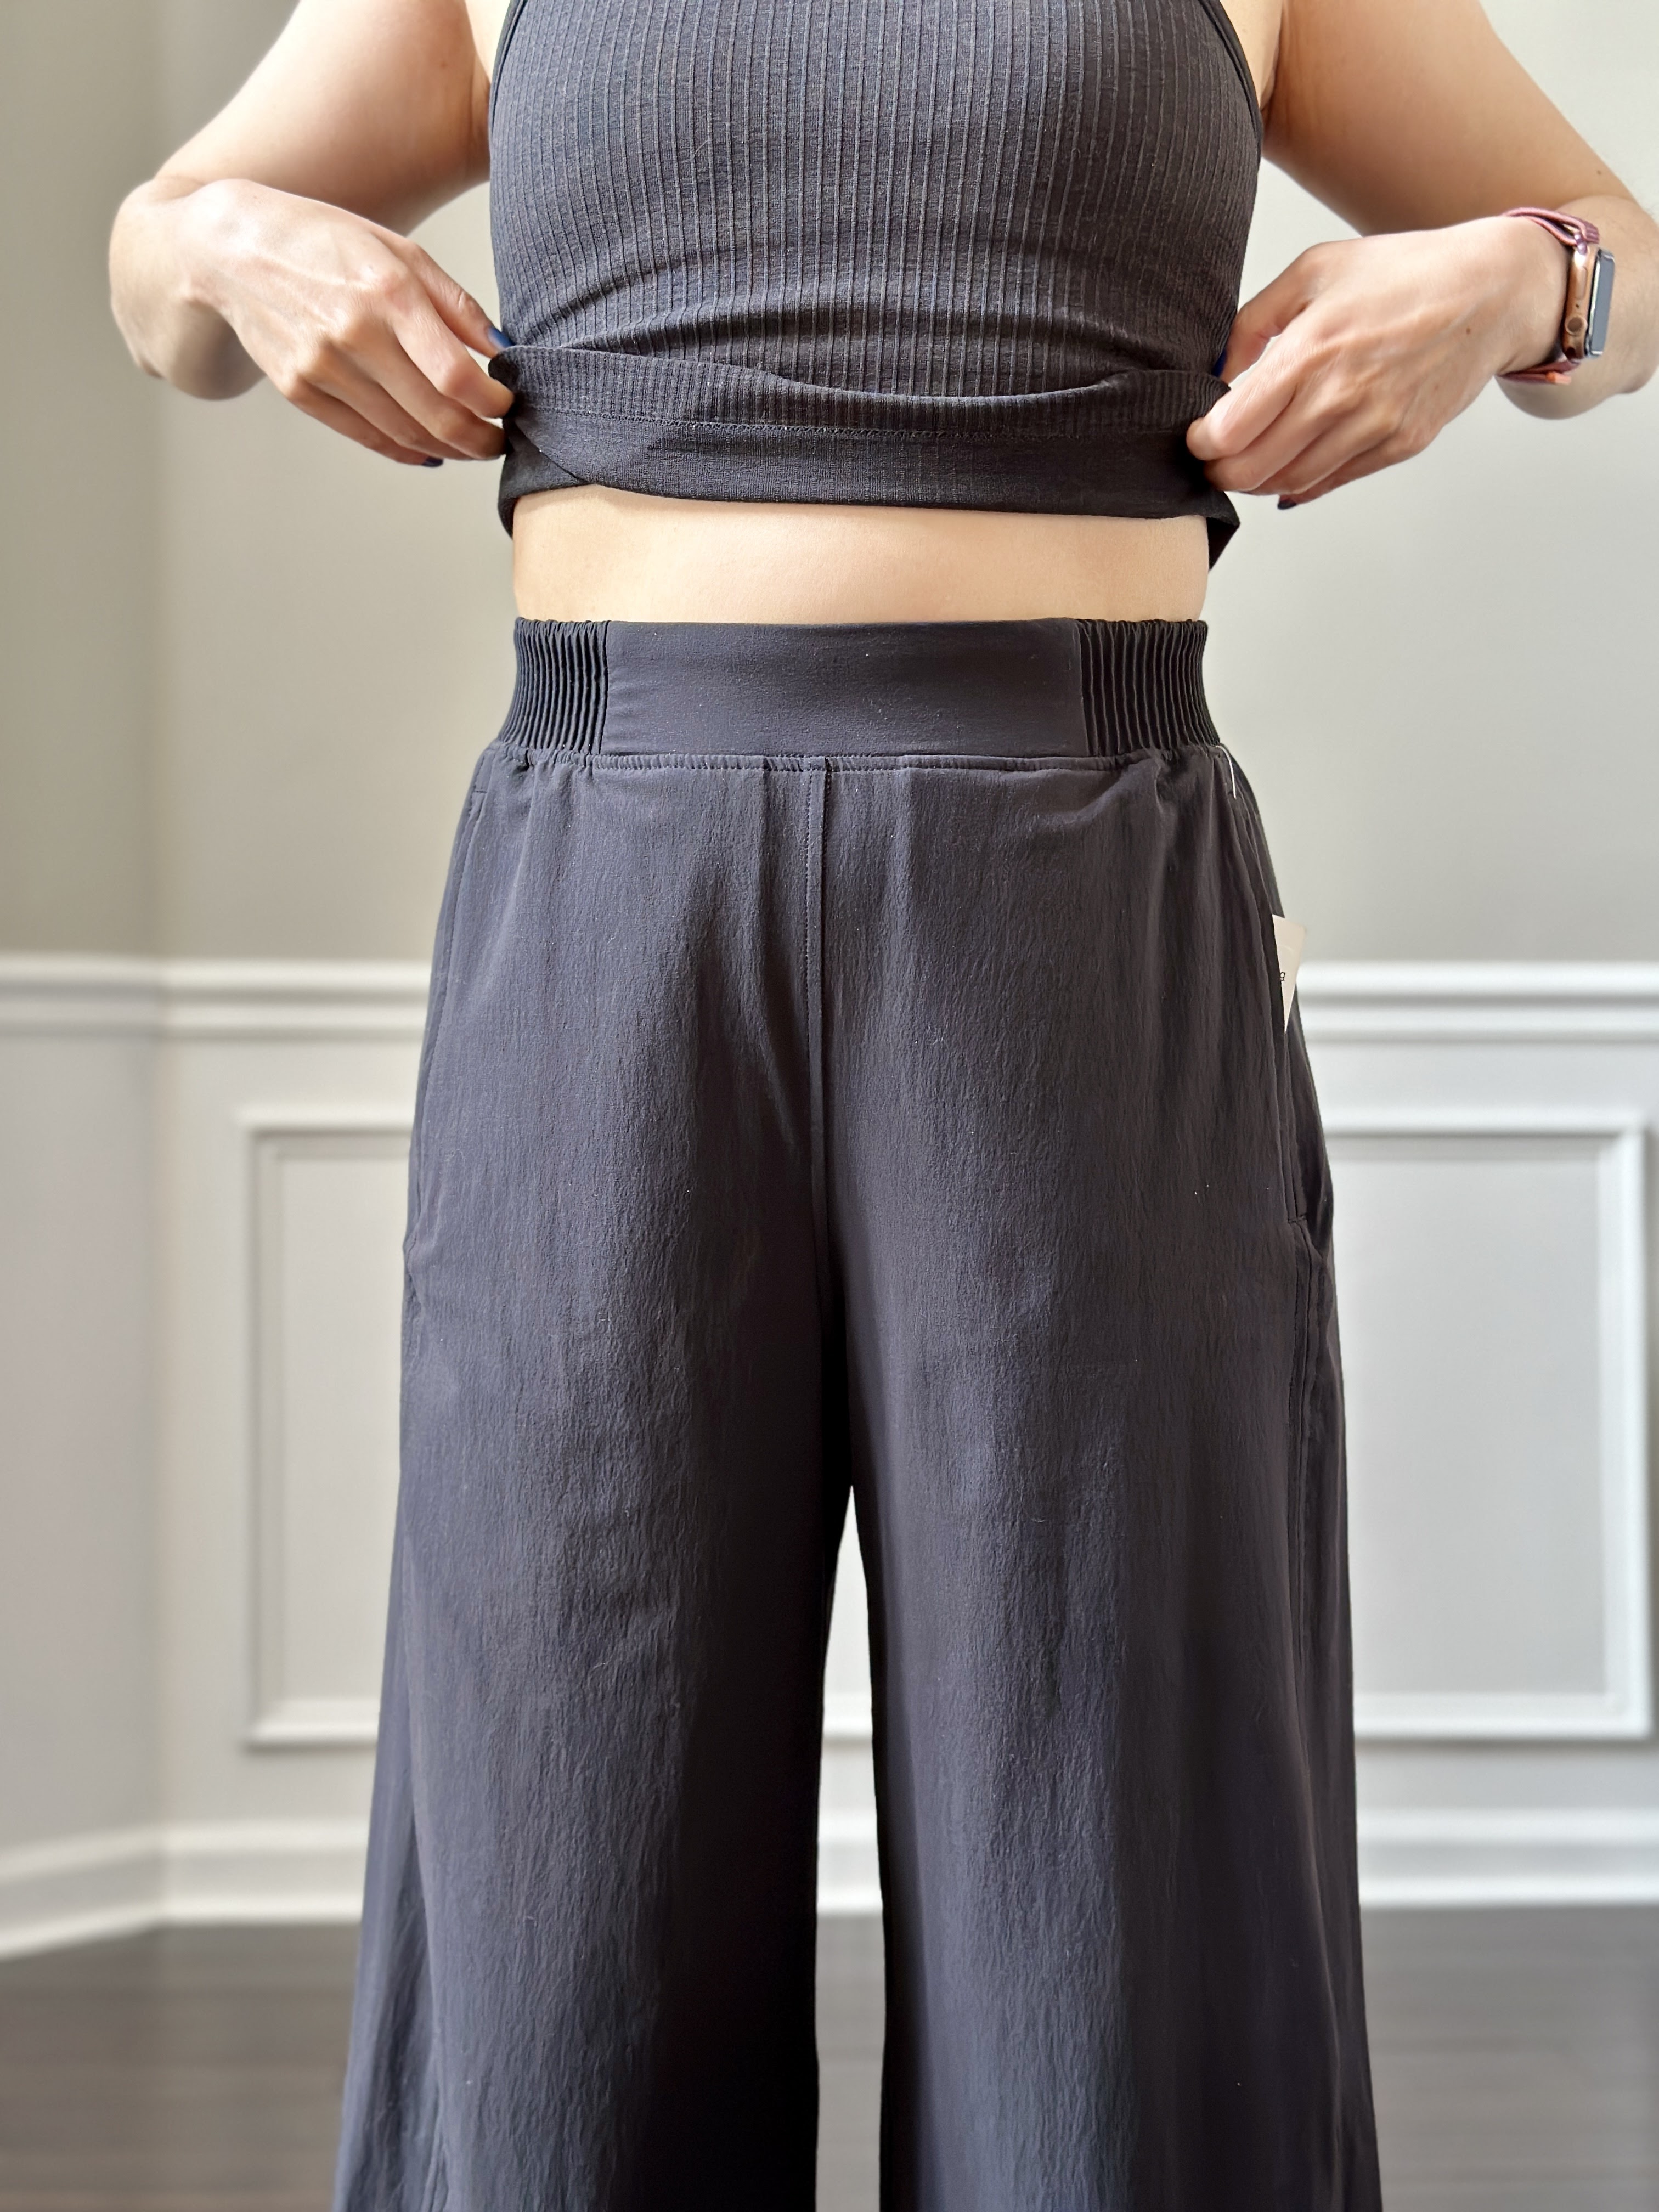 Fit Review Friday! Stretch Woven Wide-Leg High-Rise Cropped Pant & Scuba  High-Rise Cropped Jogger WMTM Update!